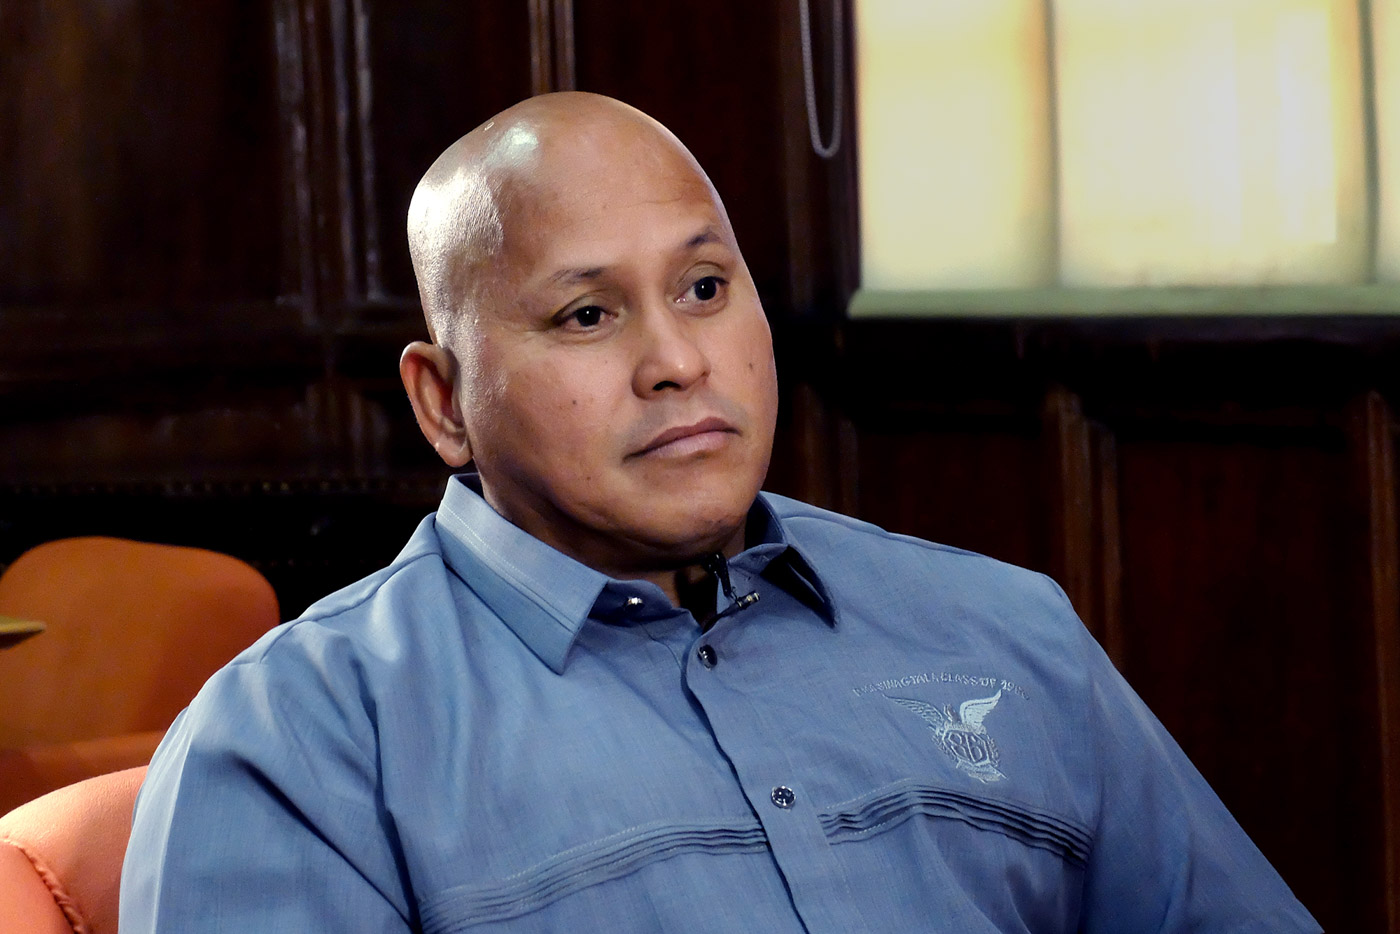 WRONG MESSAGE? A Guam legislator says inviting Bureau of Corrections chief Ronald dela Rosa, former head of the Philippine National Police, sends the wrong message. File photo by Angie de Silva/Rappler  